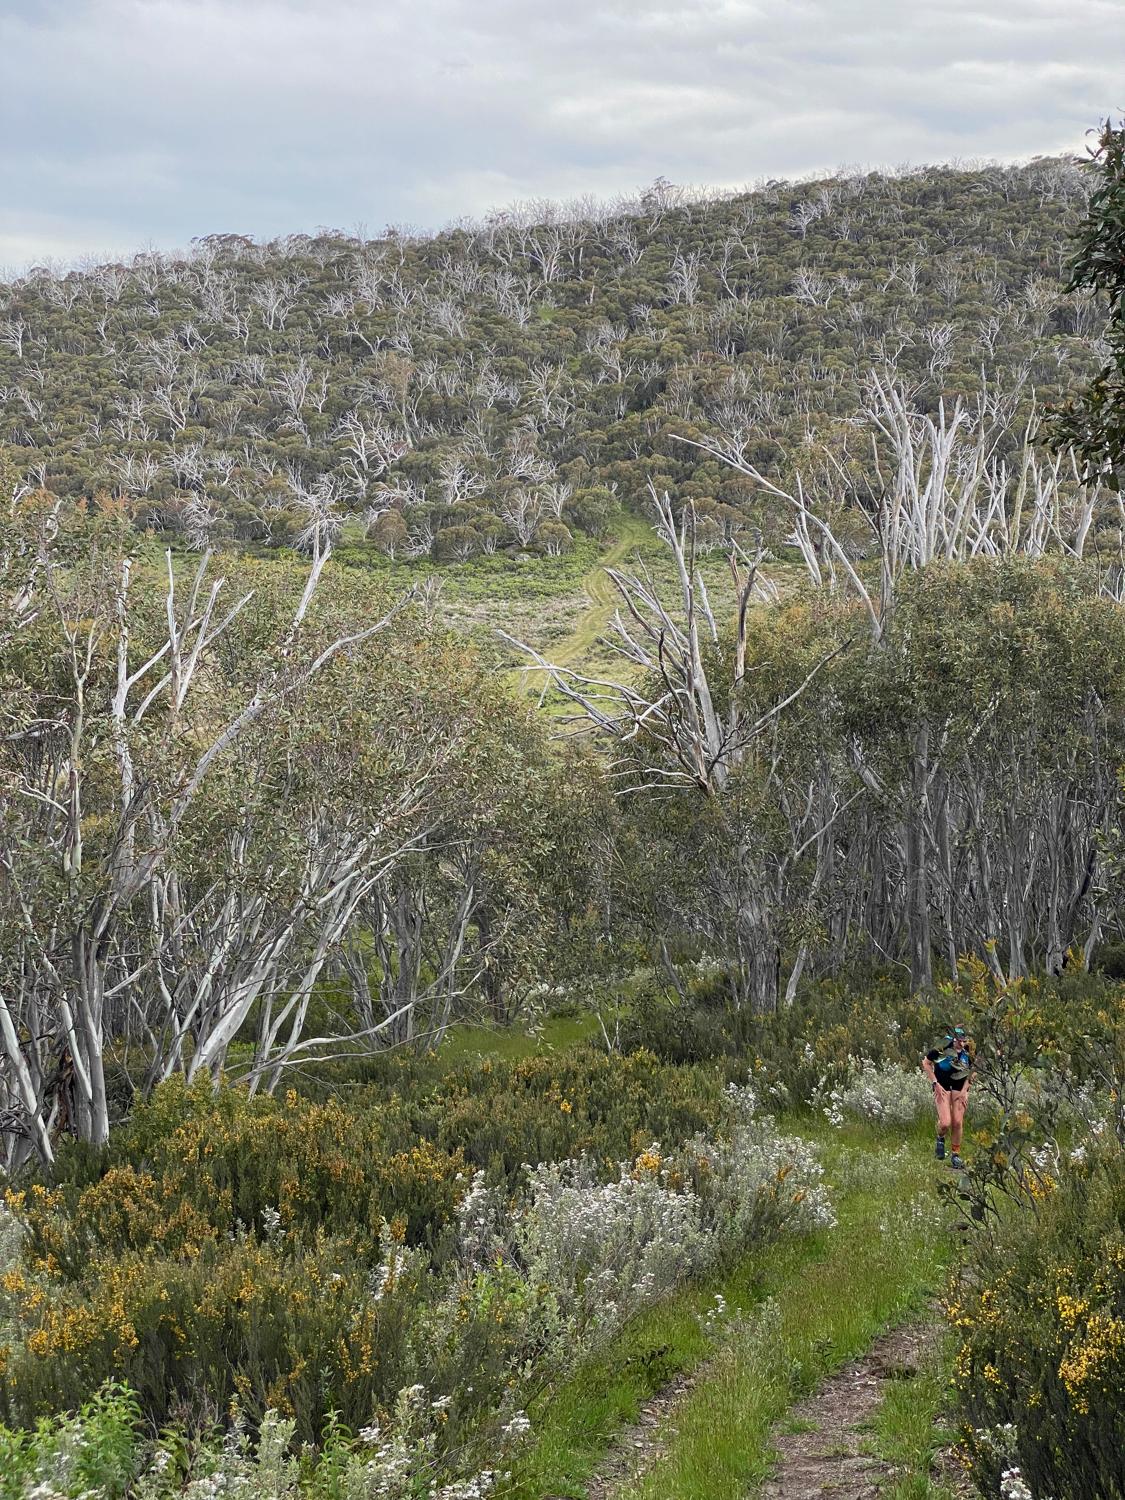 A weekend running in the Snowy Mountains